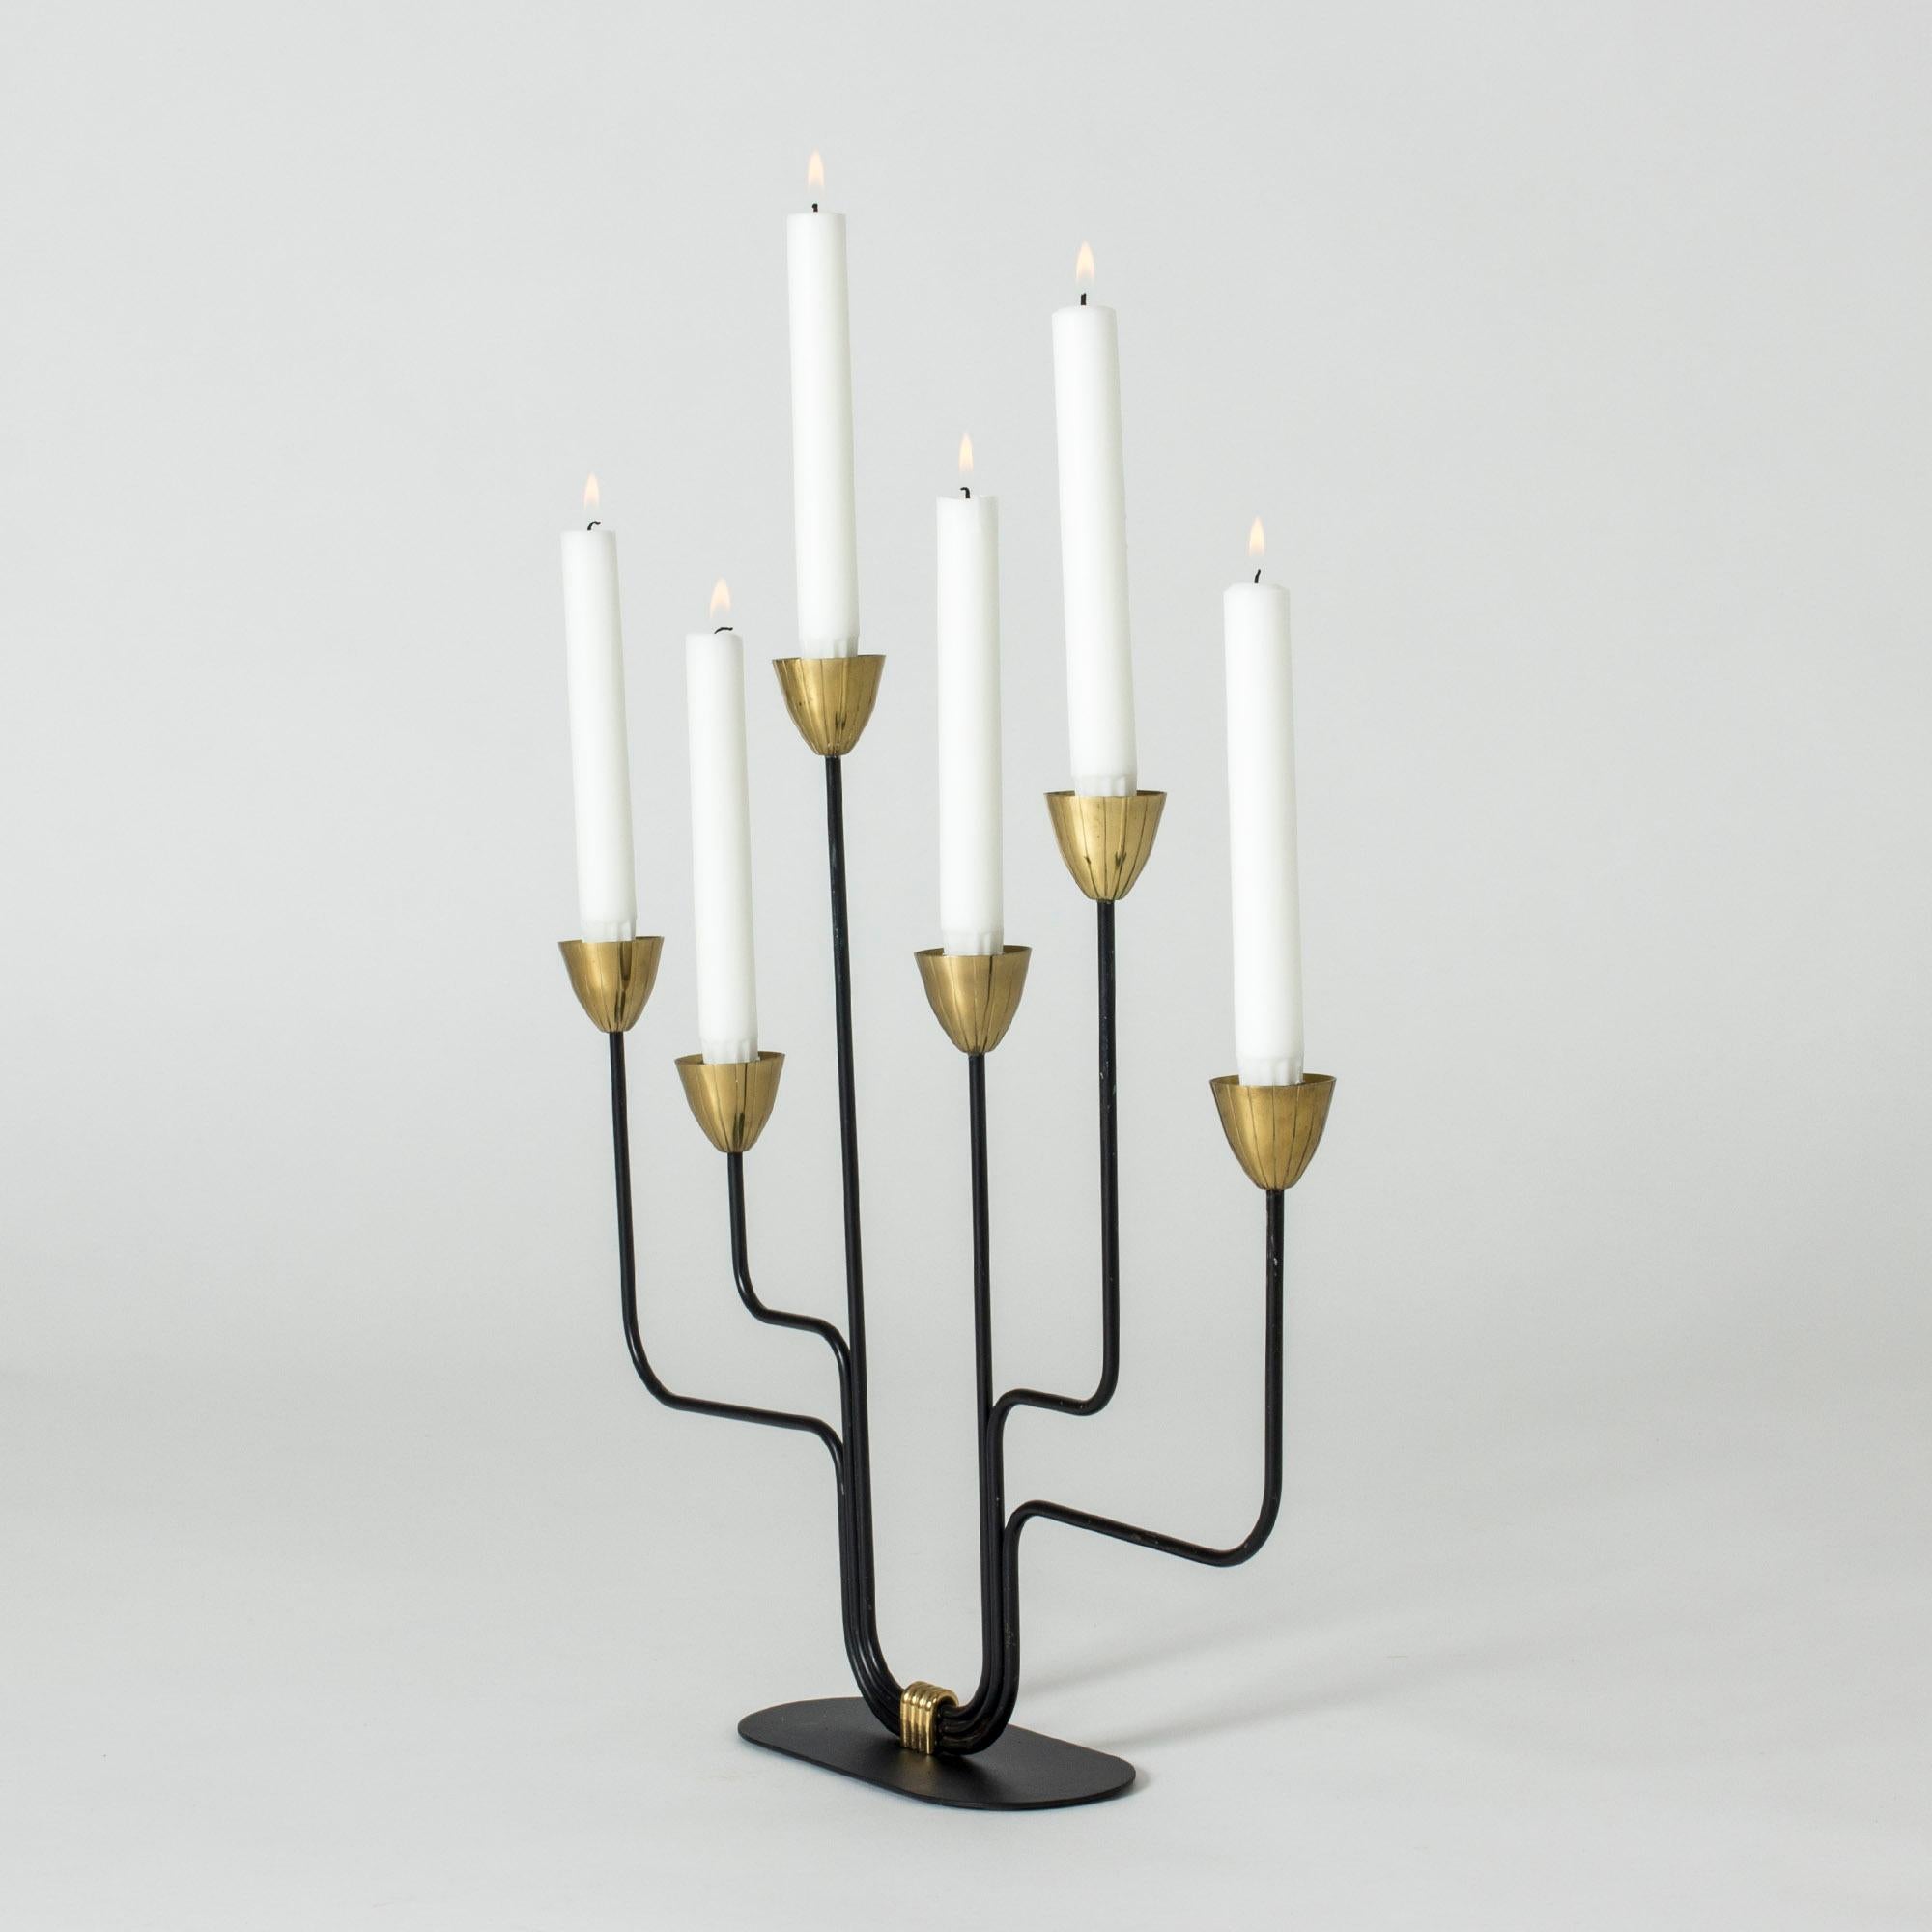 Striking lacquered metal and brass candlestick with six arms by Gunnar Ander. Great play between the sleek thin black frame and the warm brass.